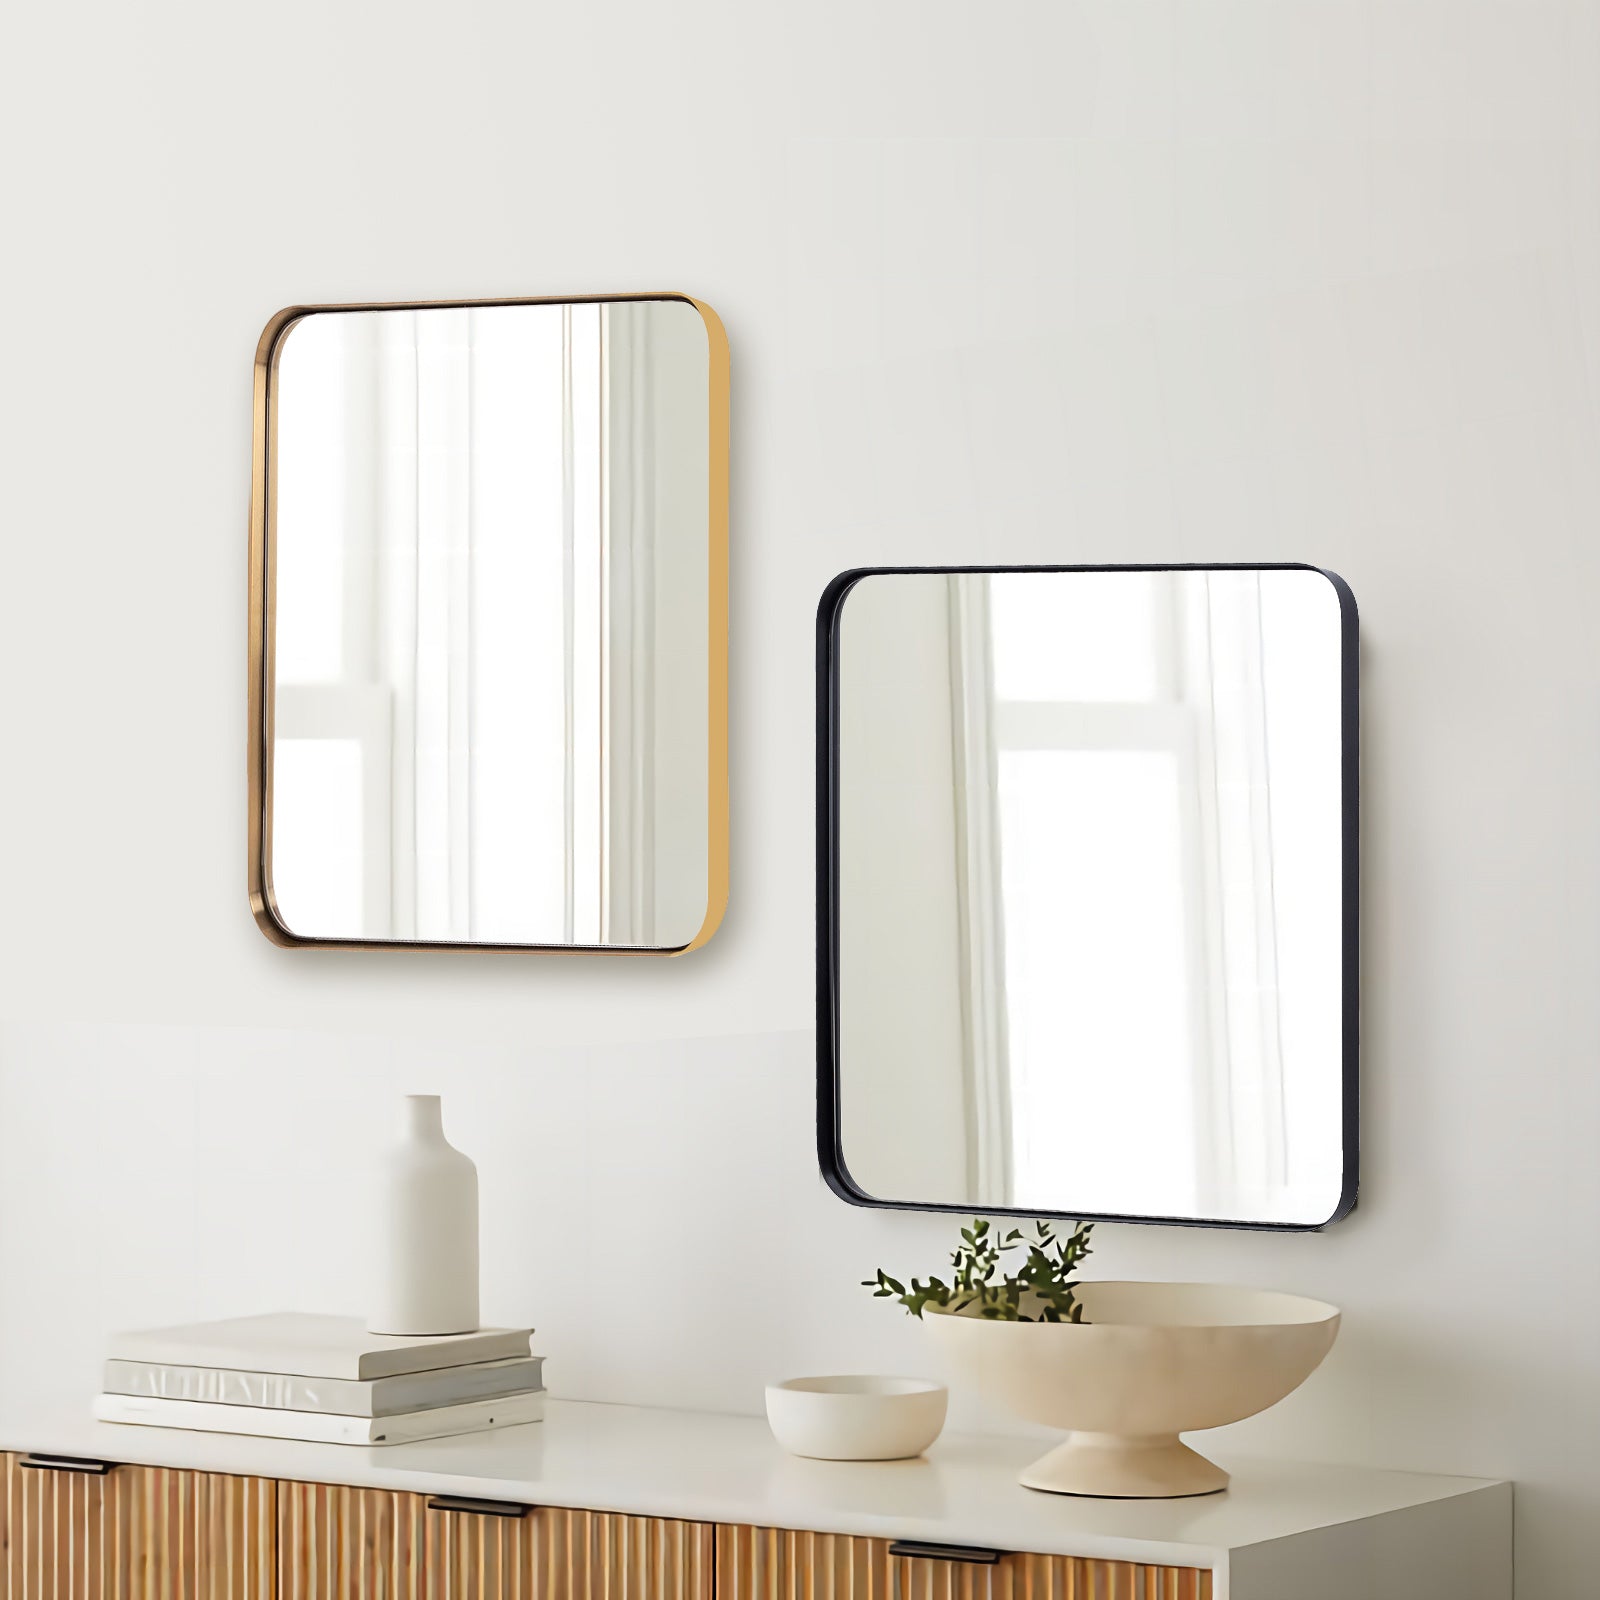 Square Bathroom Mirror, Wall Decor Circle Mirror with Stainless Steel Frame